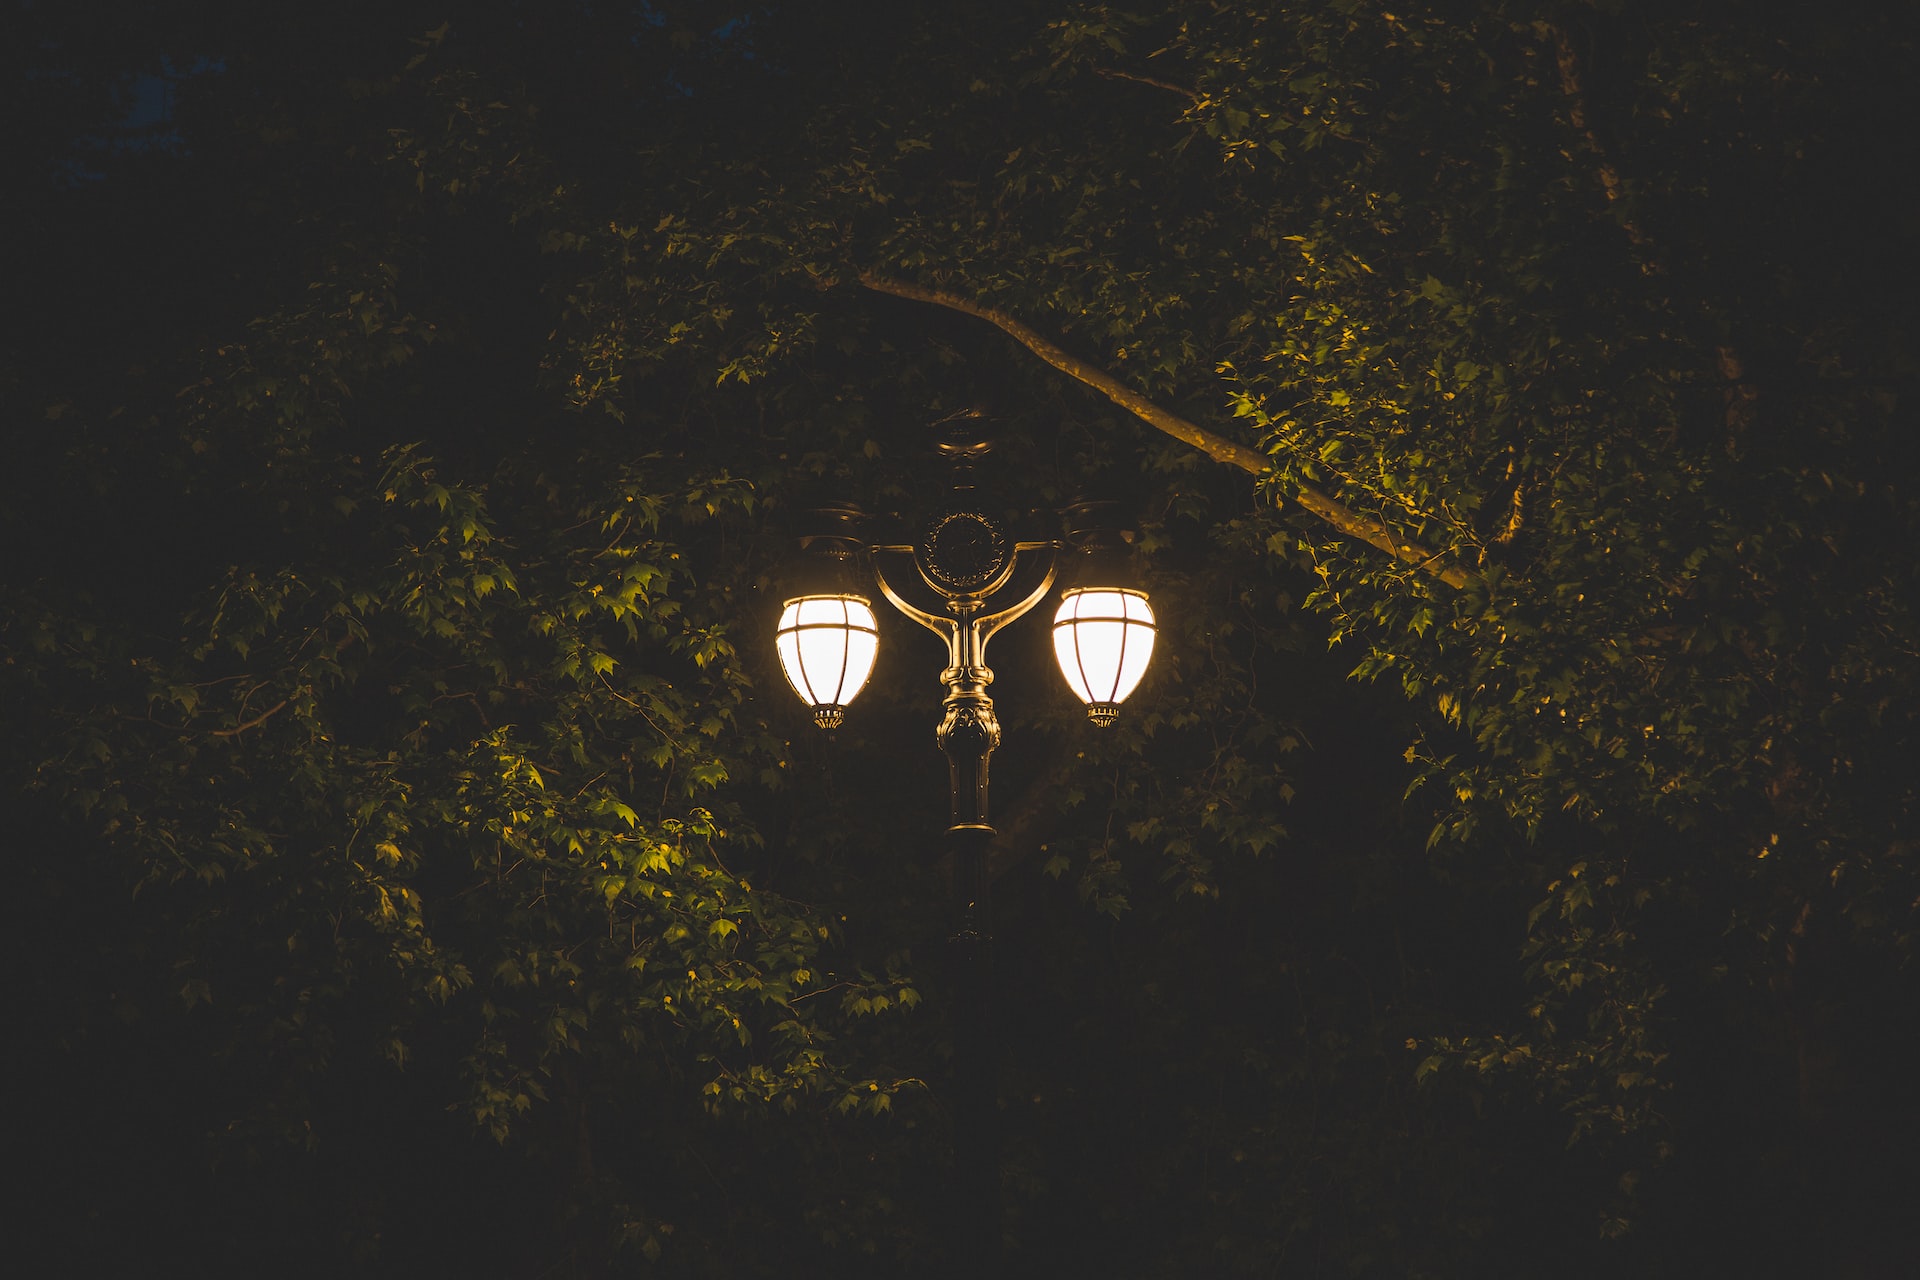 A light pole with intricate design and two turned-on lamps at night illuminating the leaves of a tree